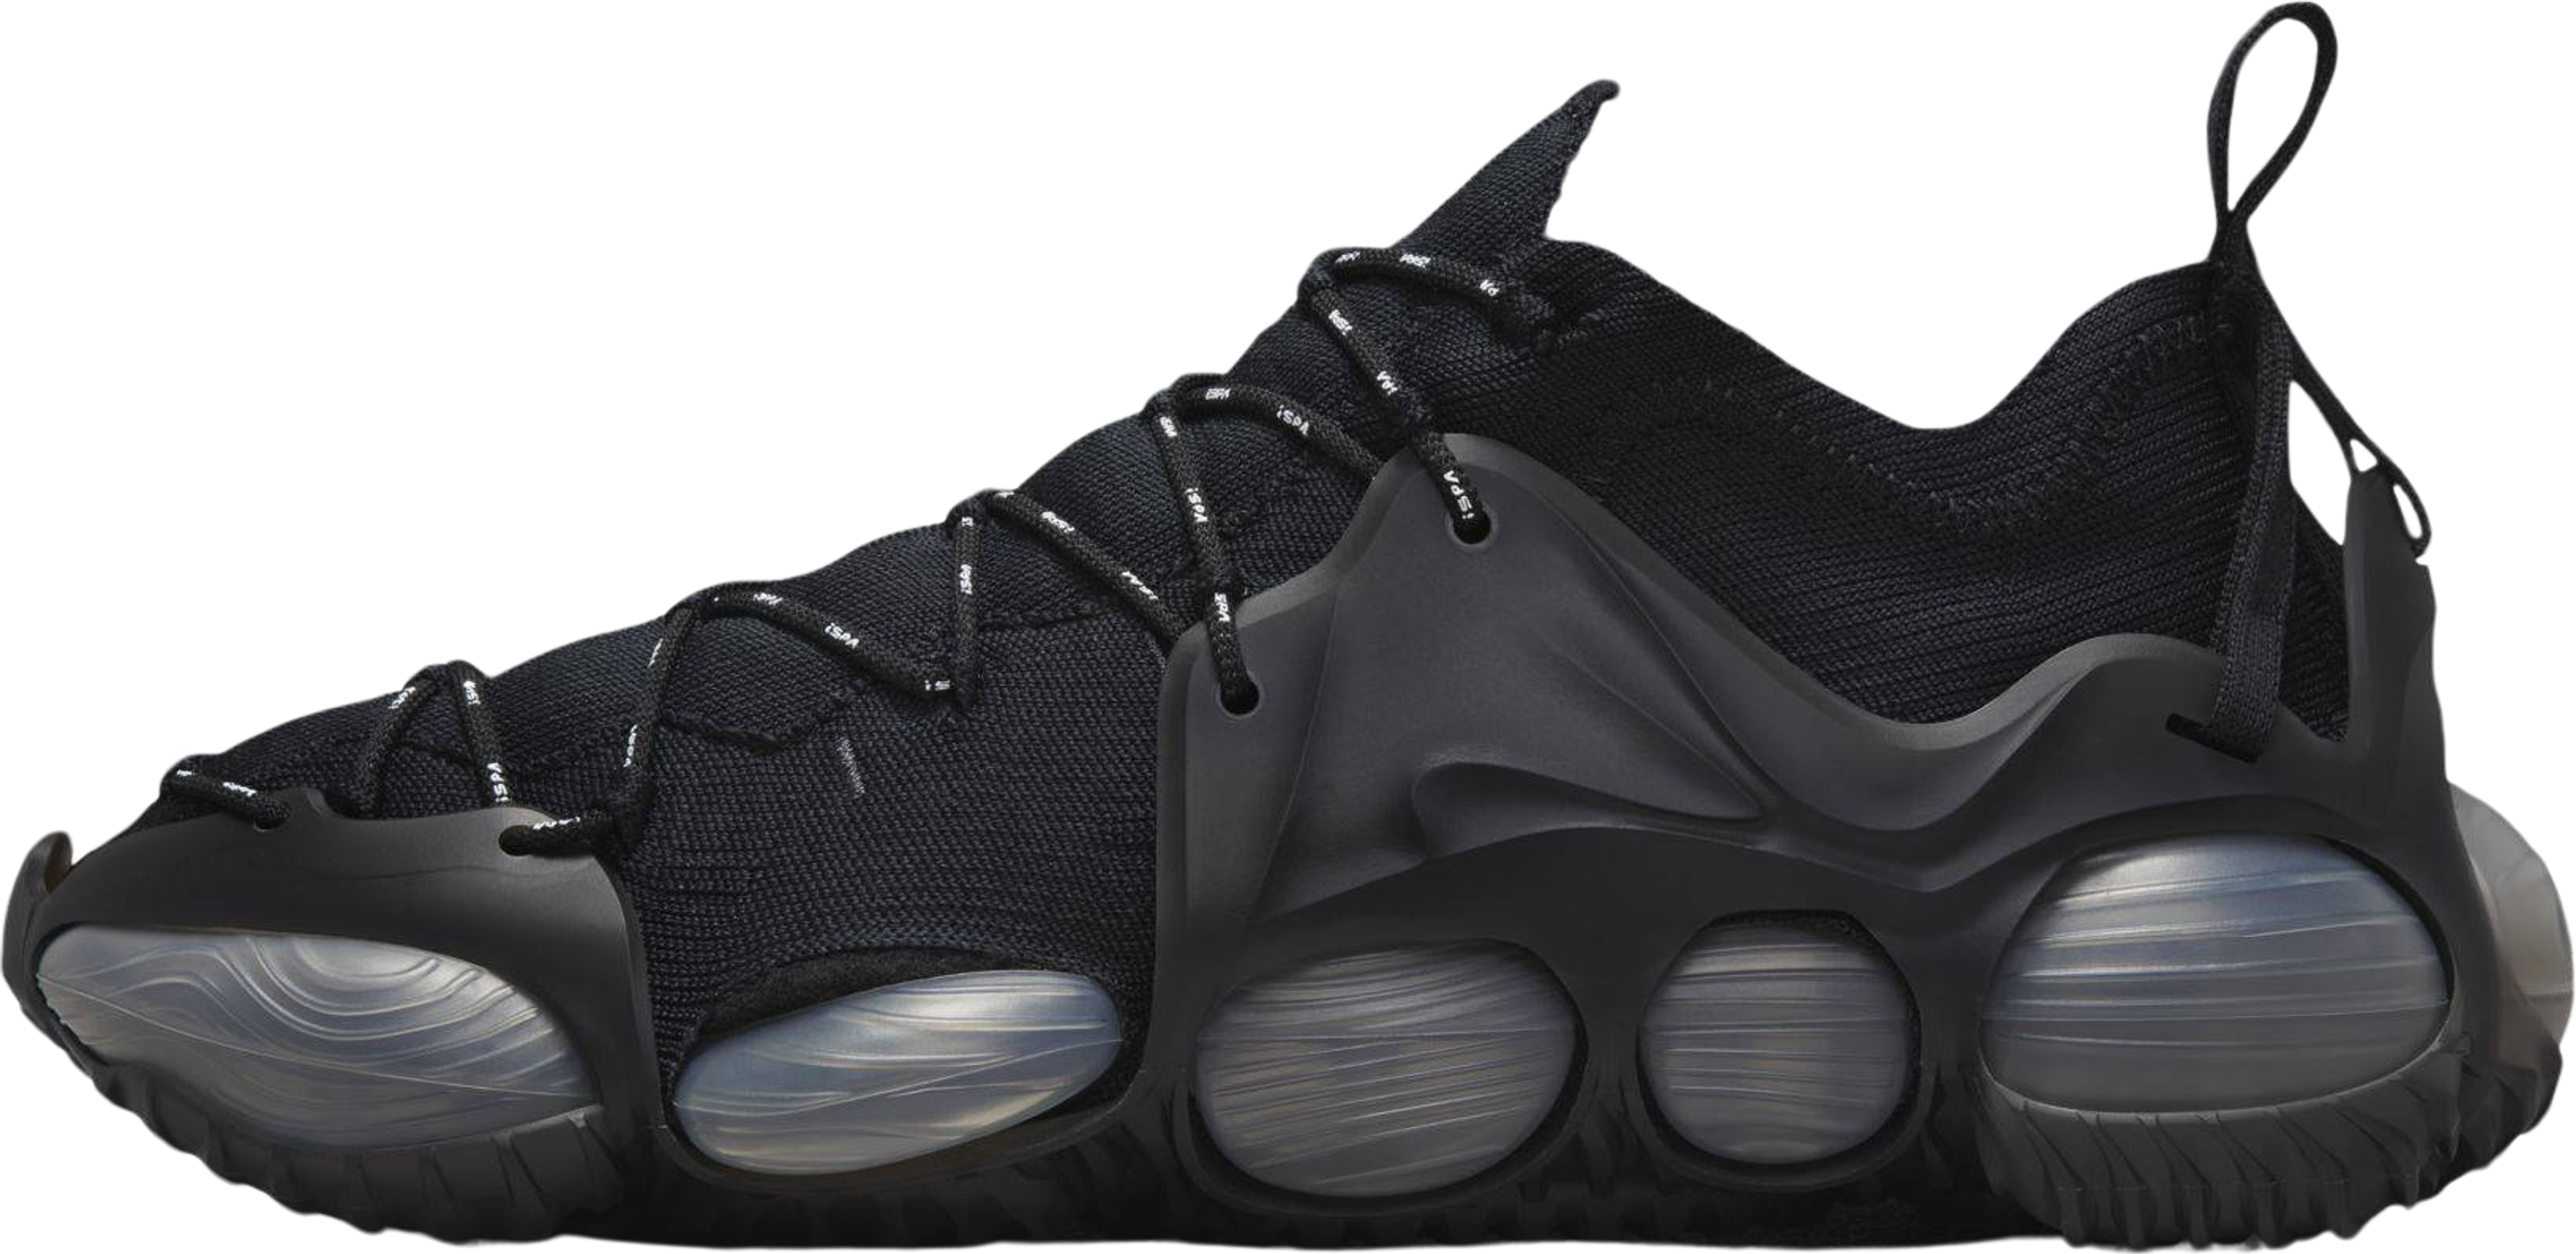 Nike ISPA Link Axis Black/Anthracite